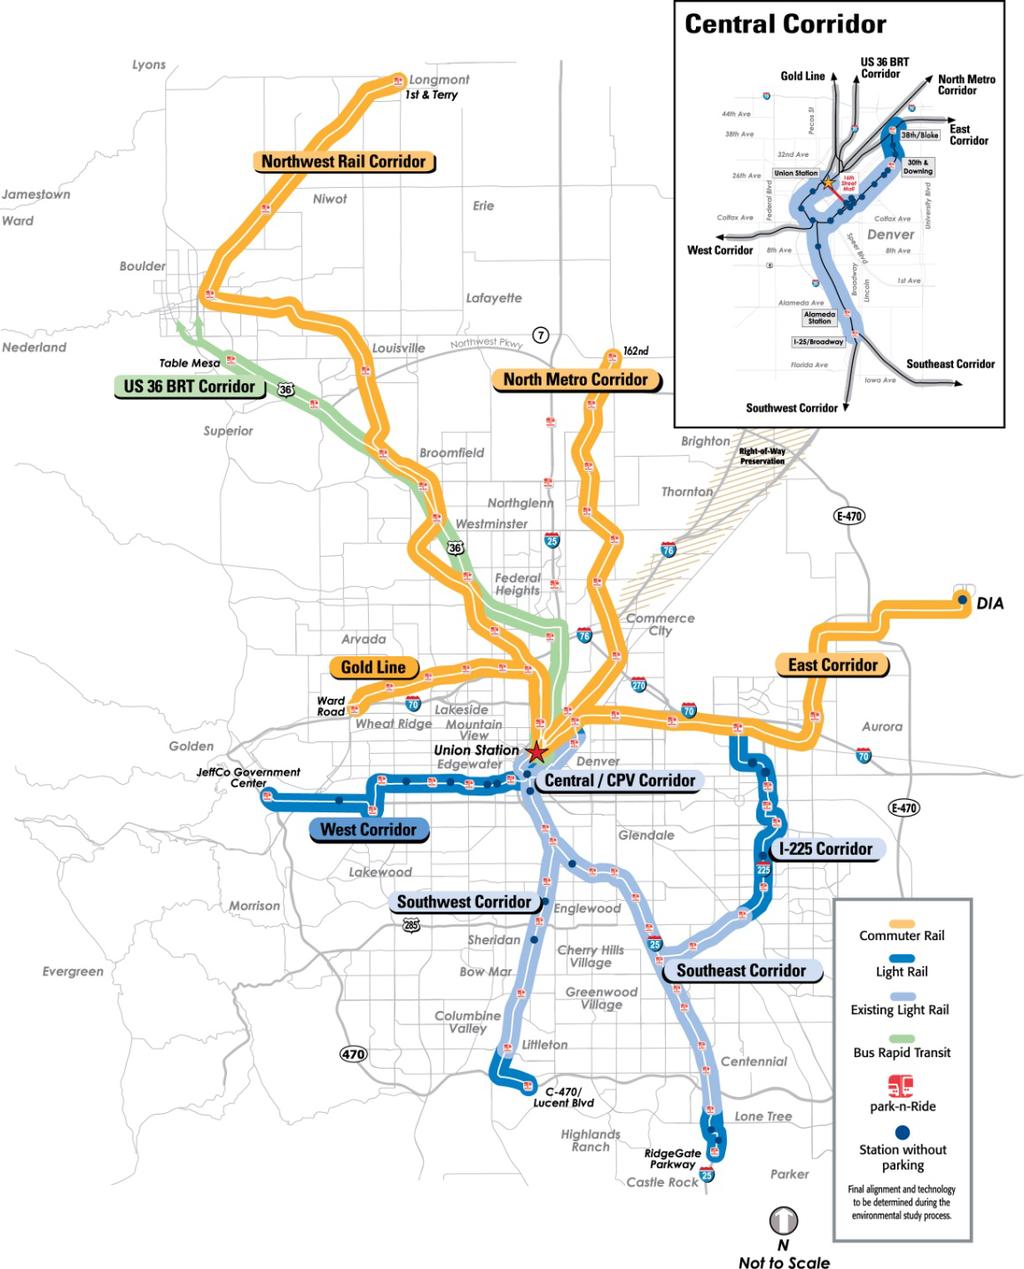 The RTD FasTracks Plan 122 miles of new light rail and commuter rail 18 miles of Bus Rapid Transit (BRT) 31 new